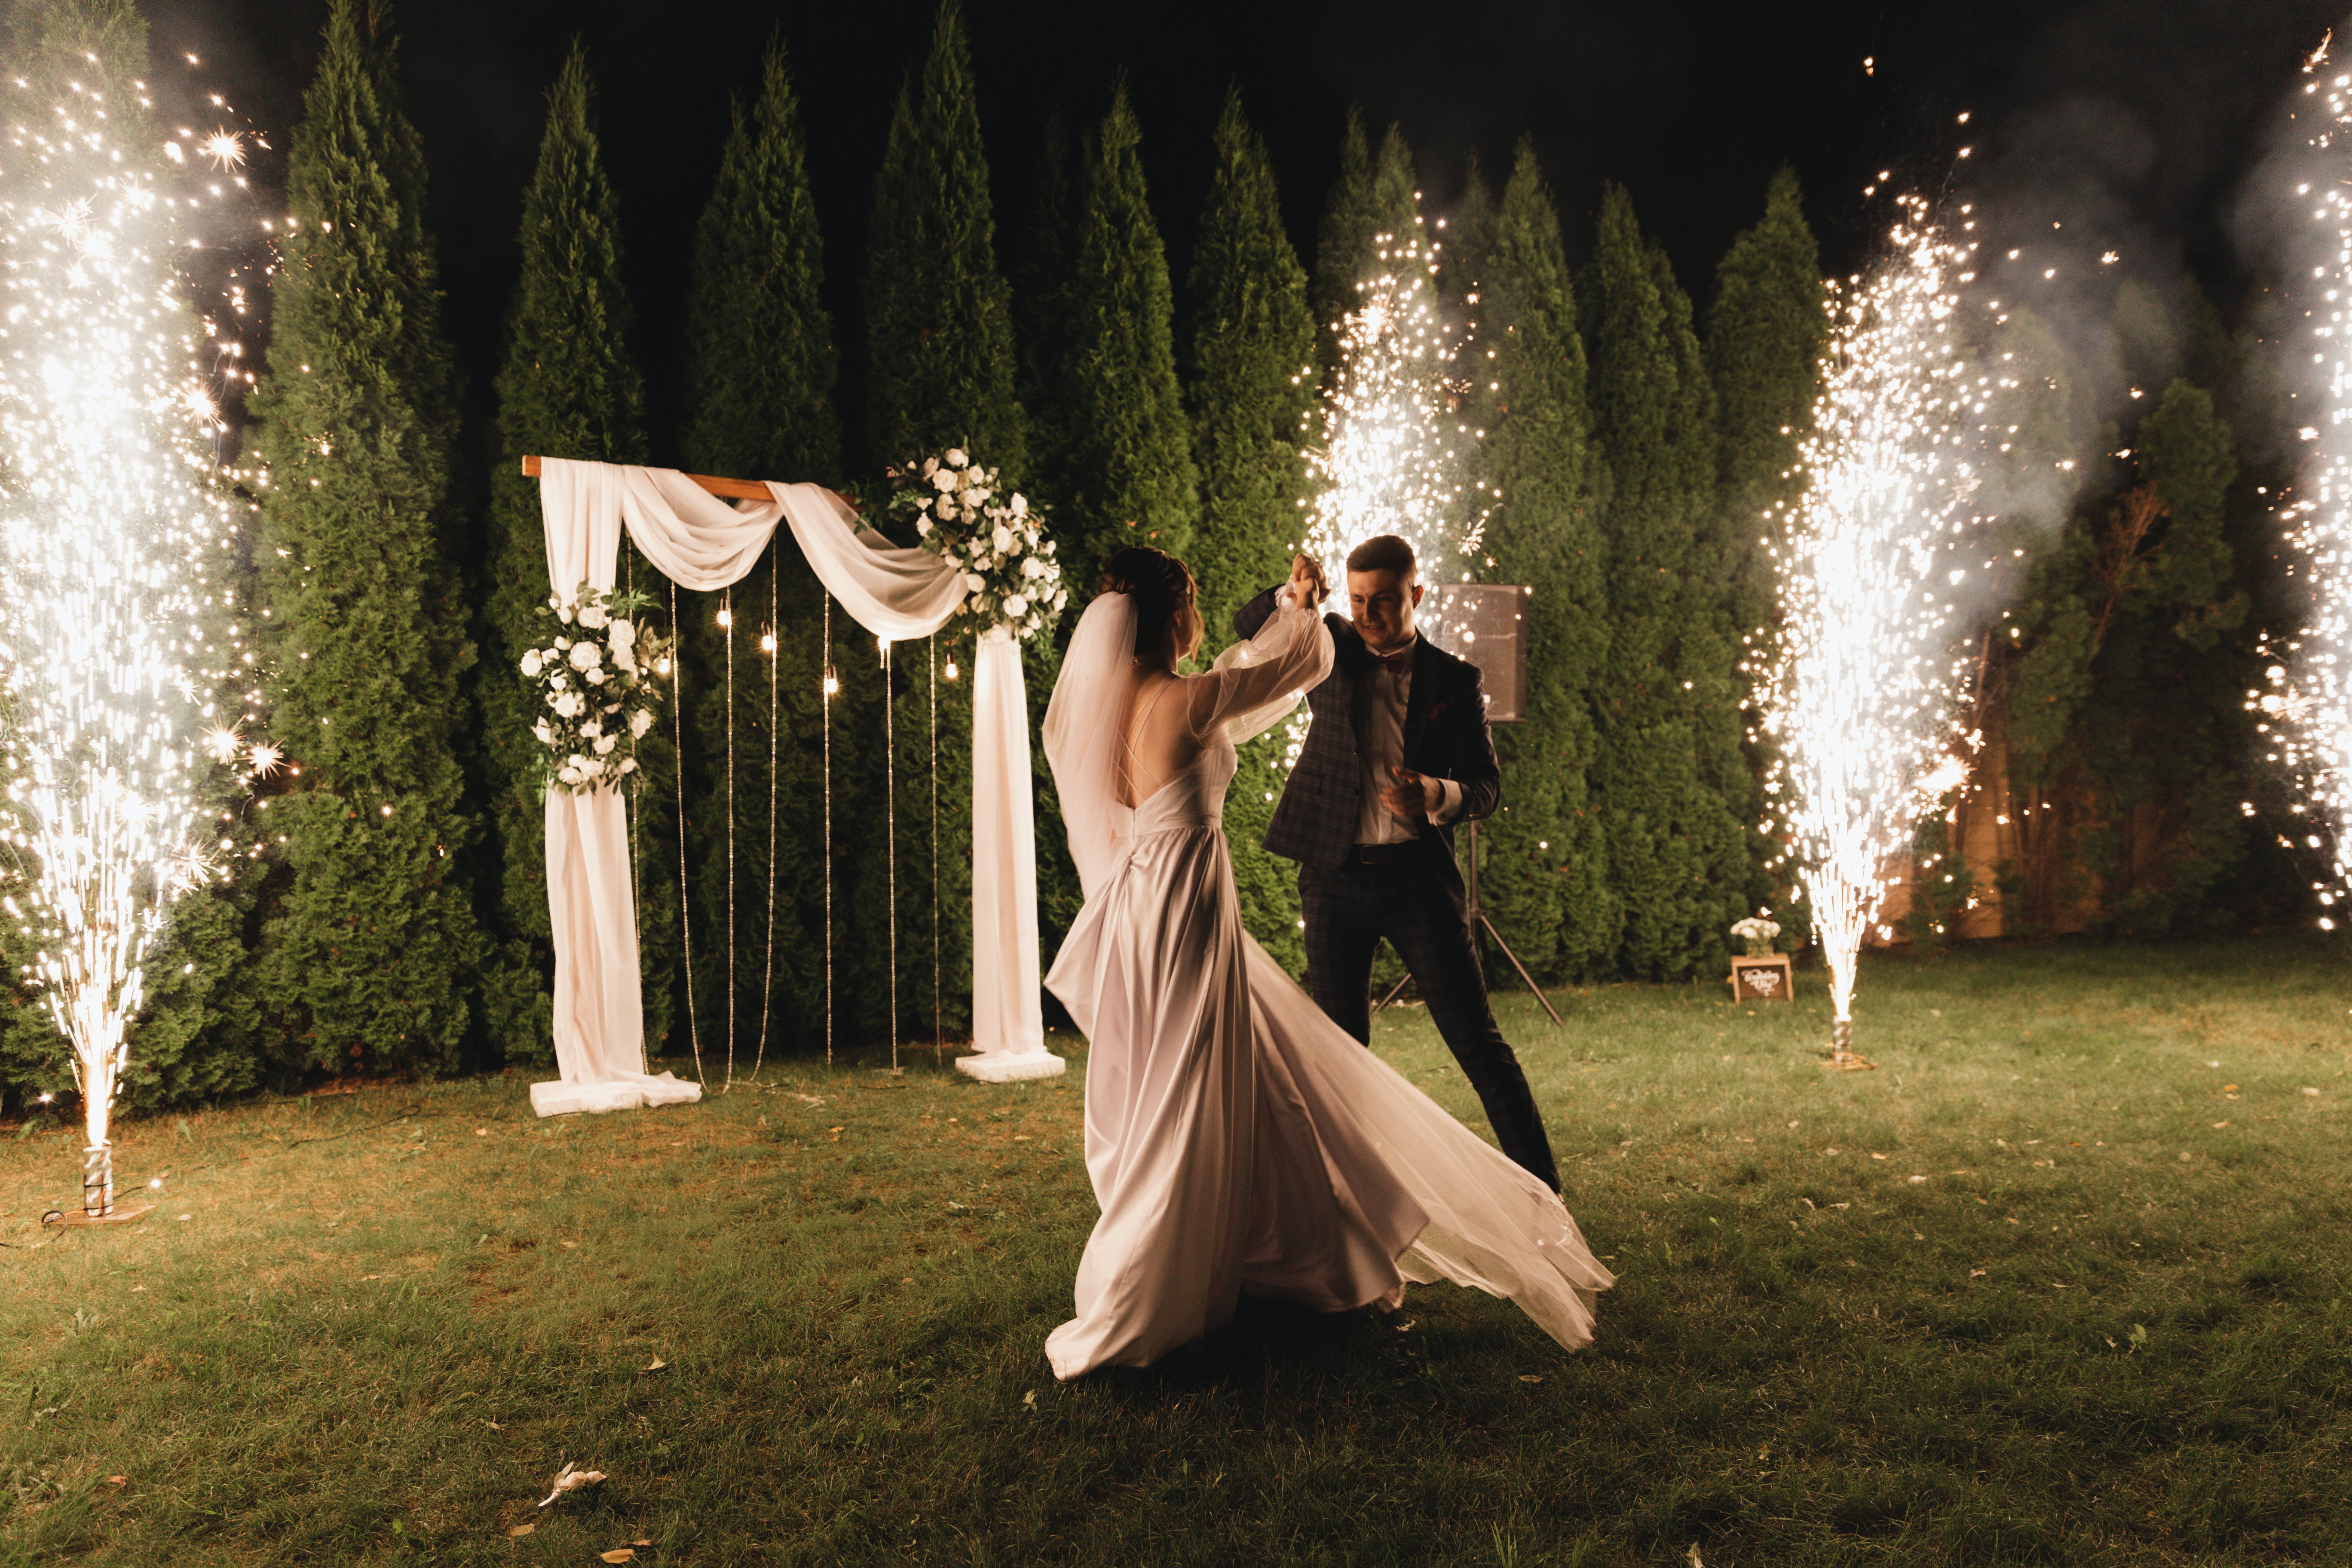 Fireworks at a wedding ceremony